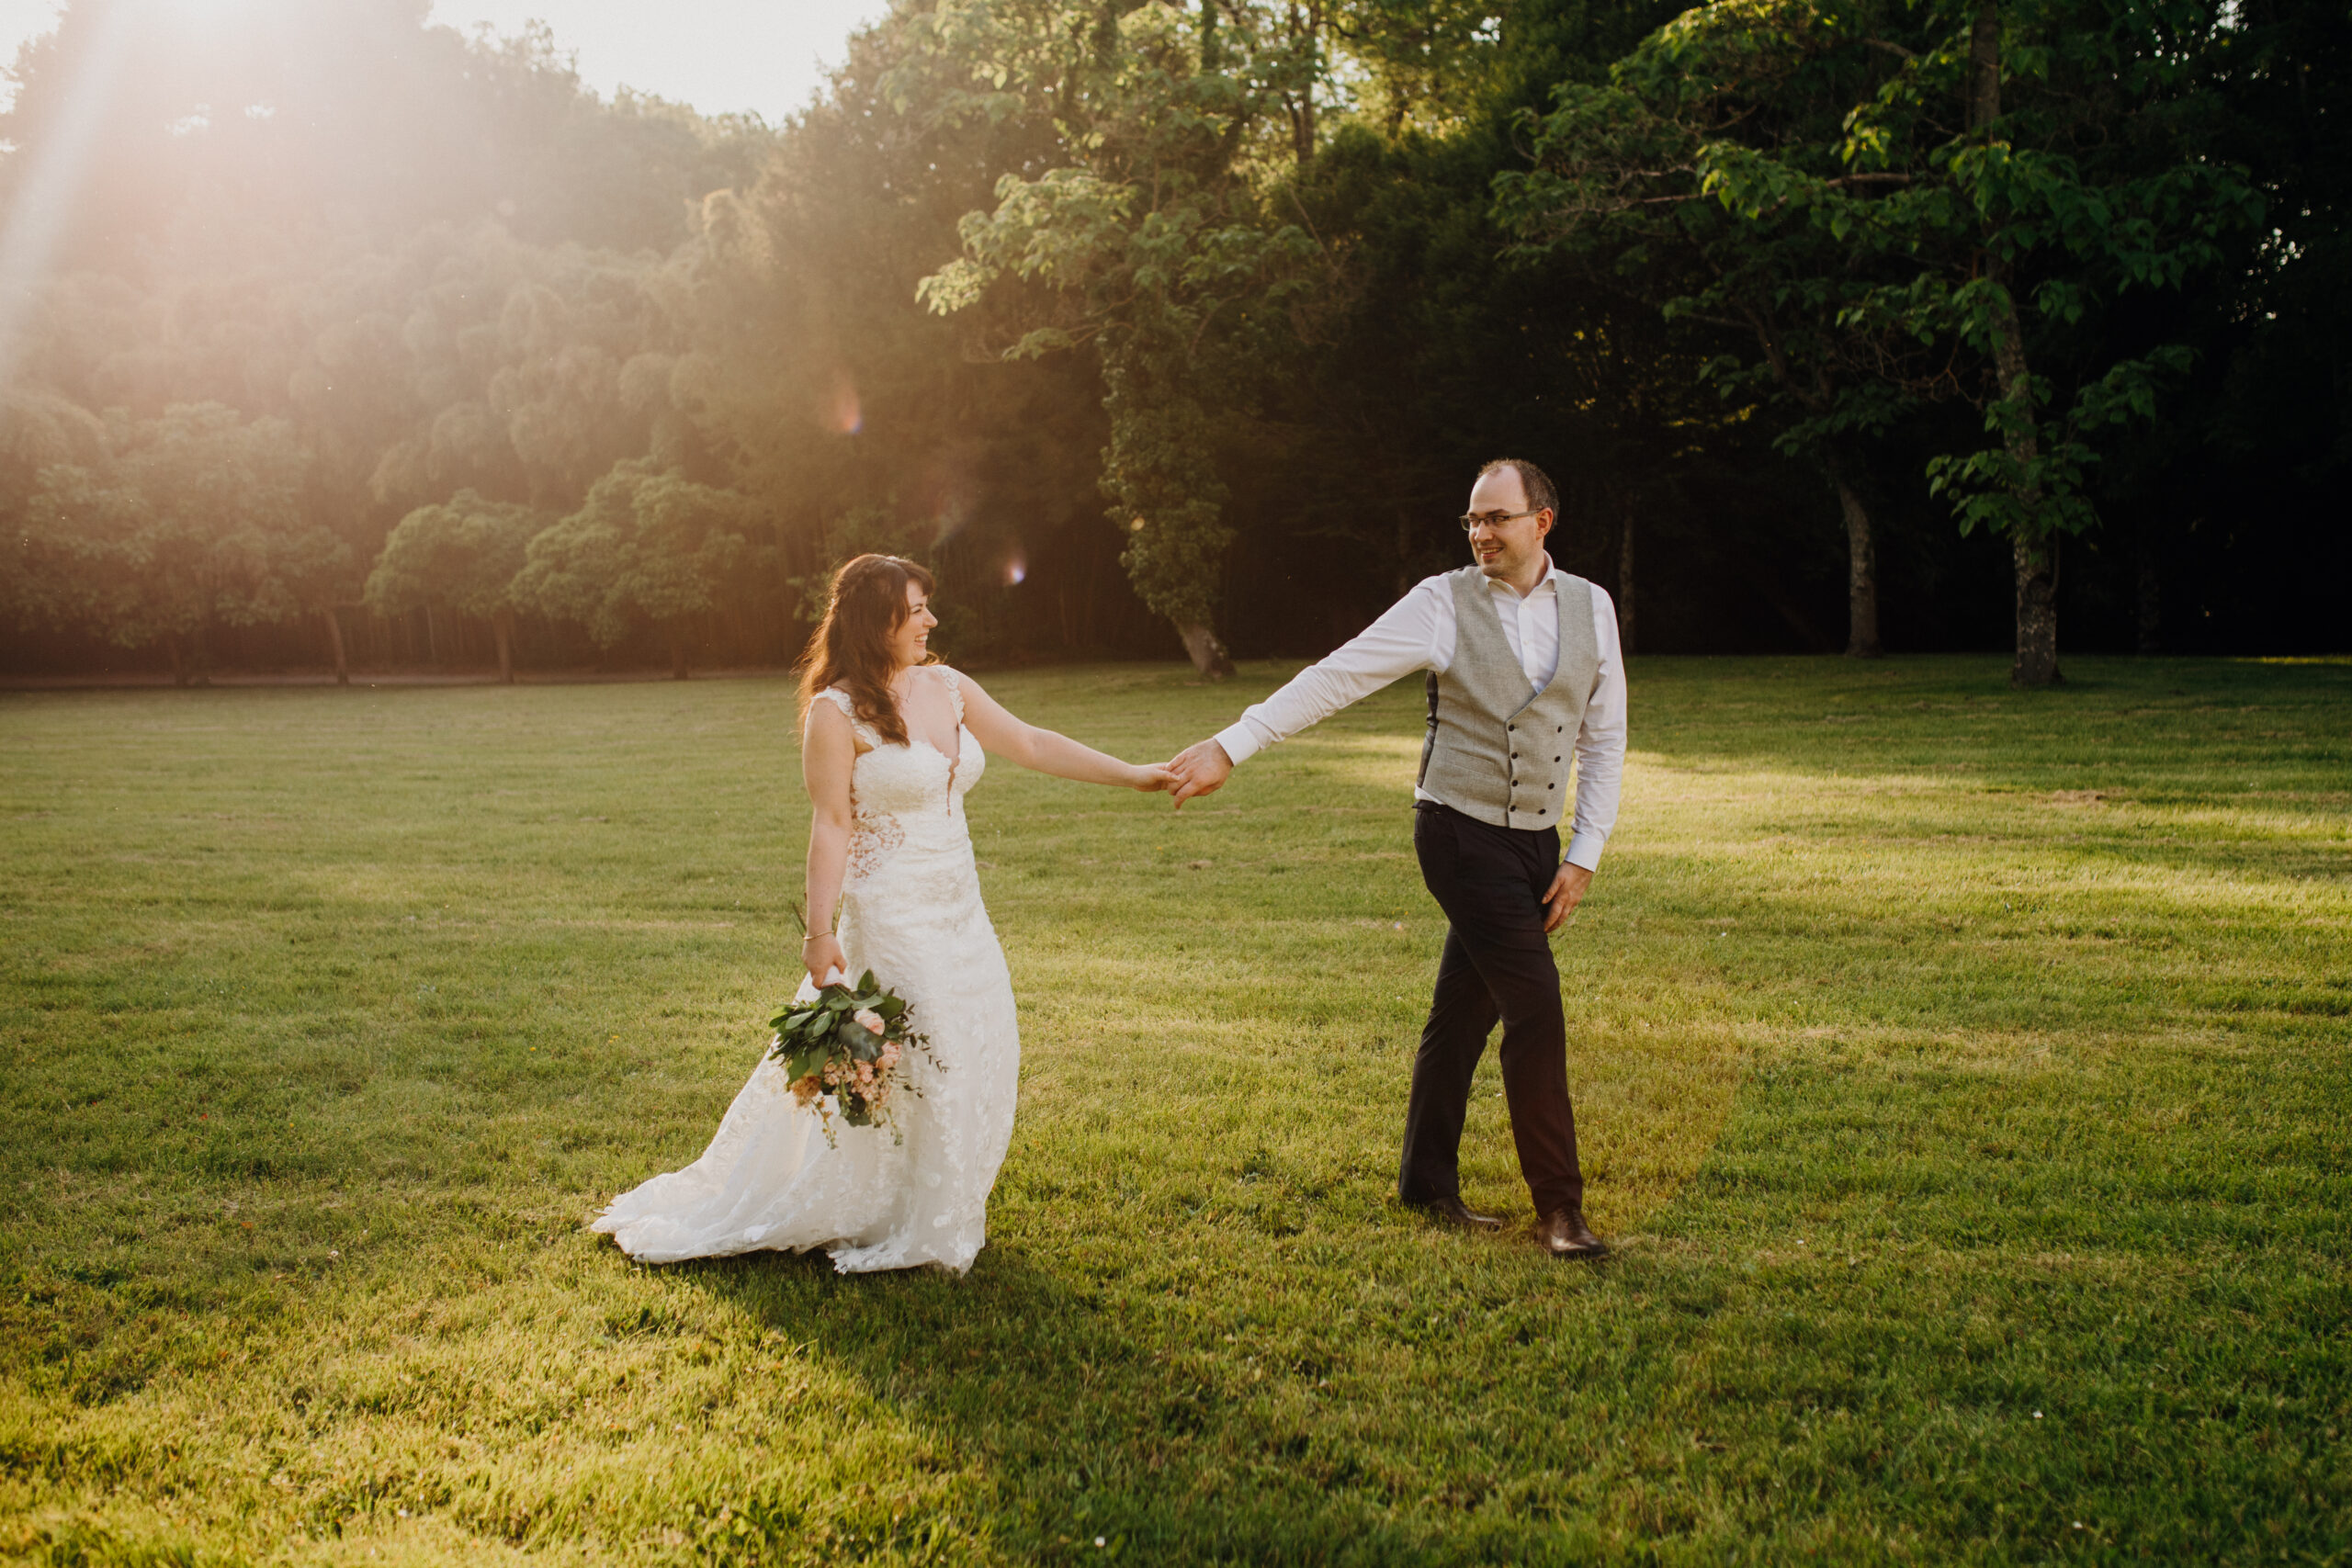 bride and groom stroll through a grassy field hand in hand smiling at each other. 